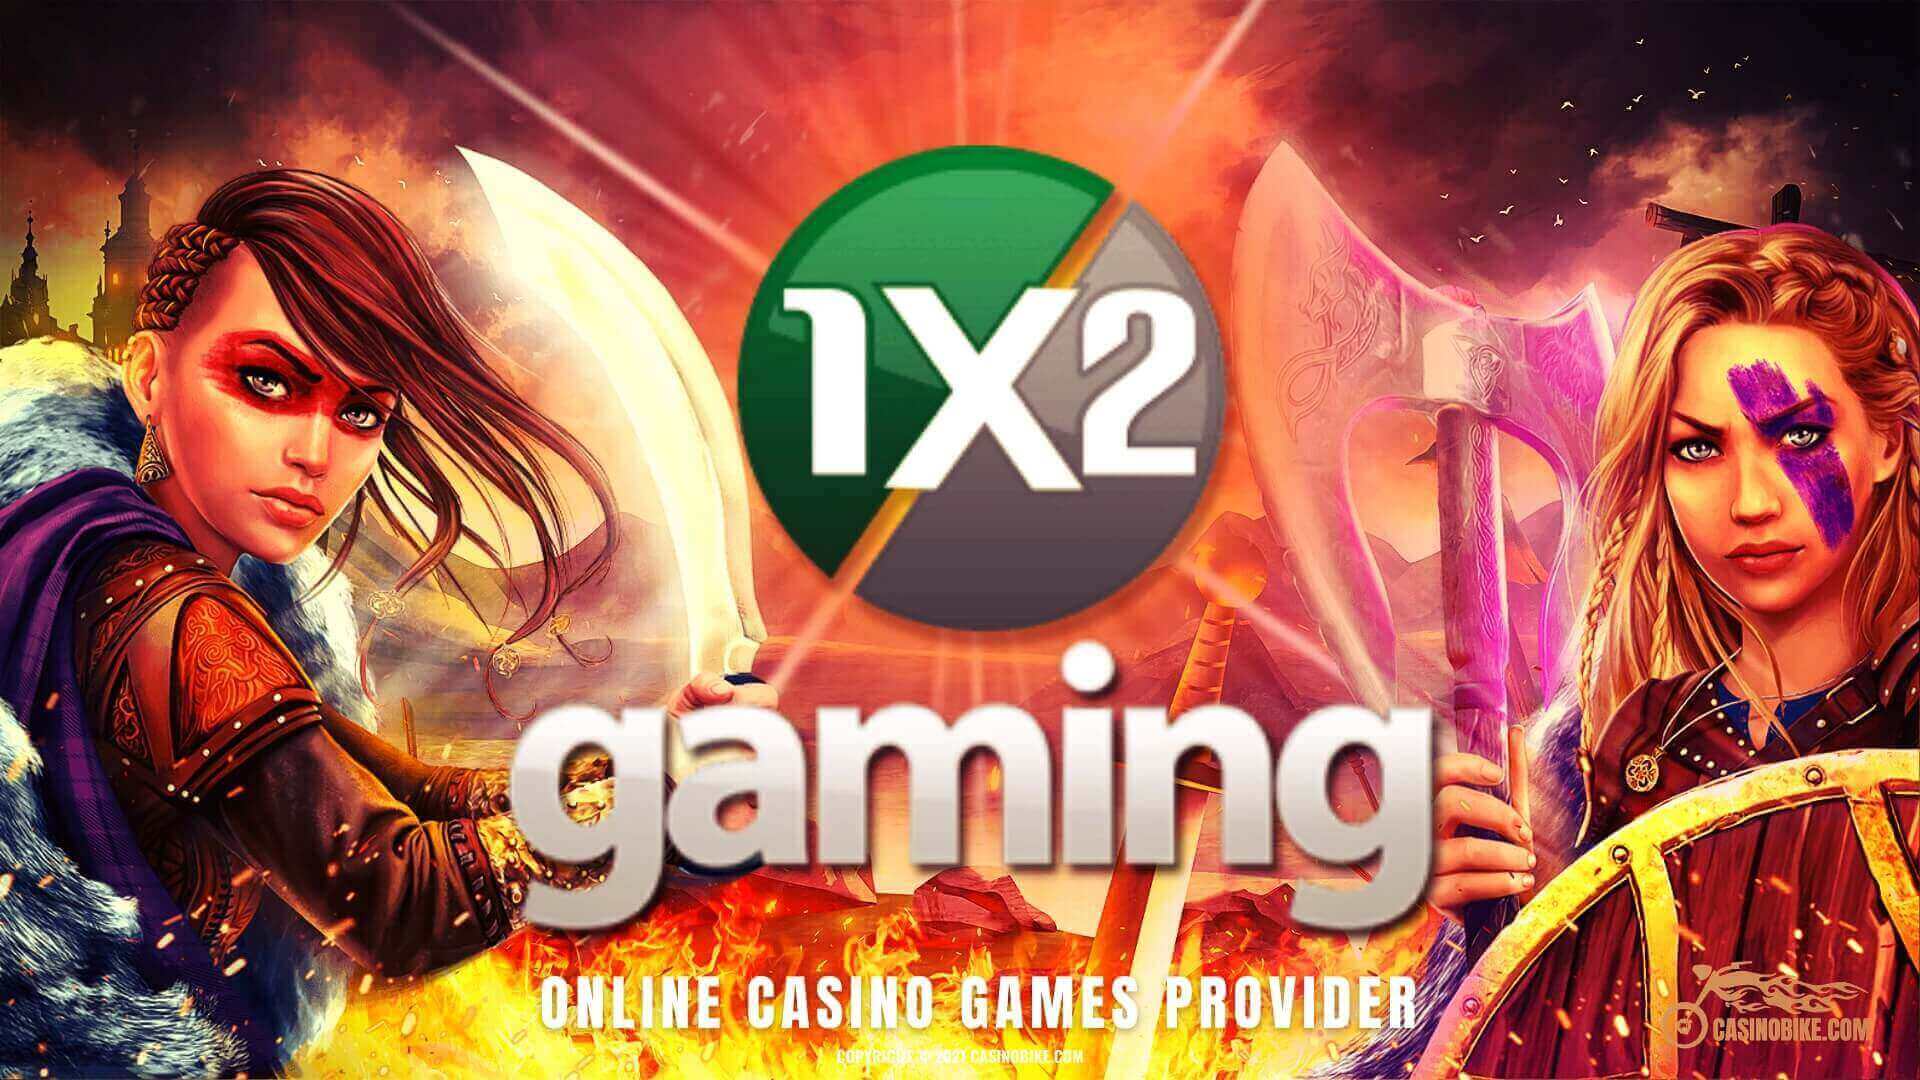 1X2 Gaming Online Casino Games Provider